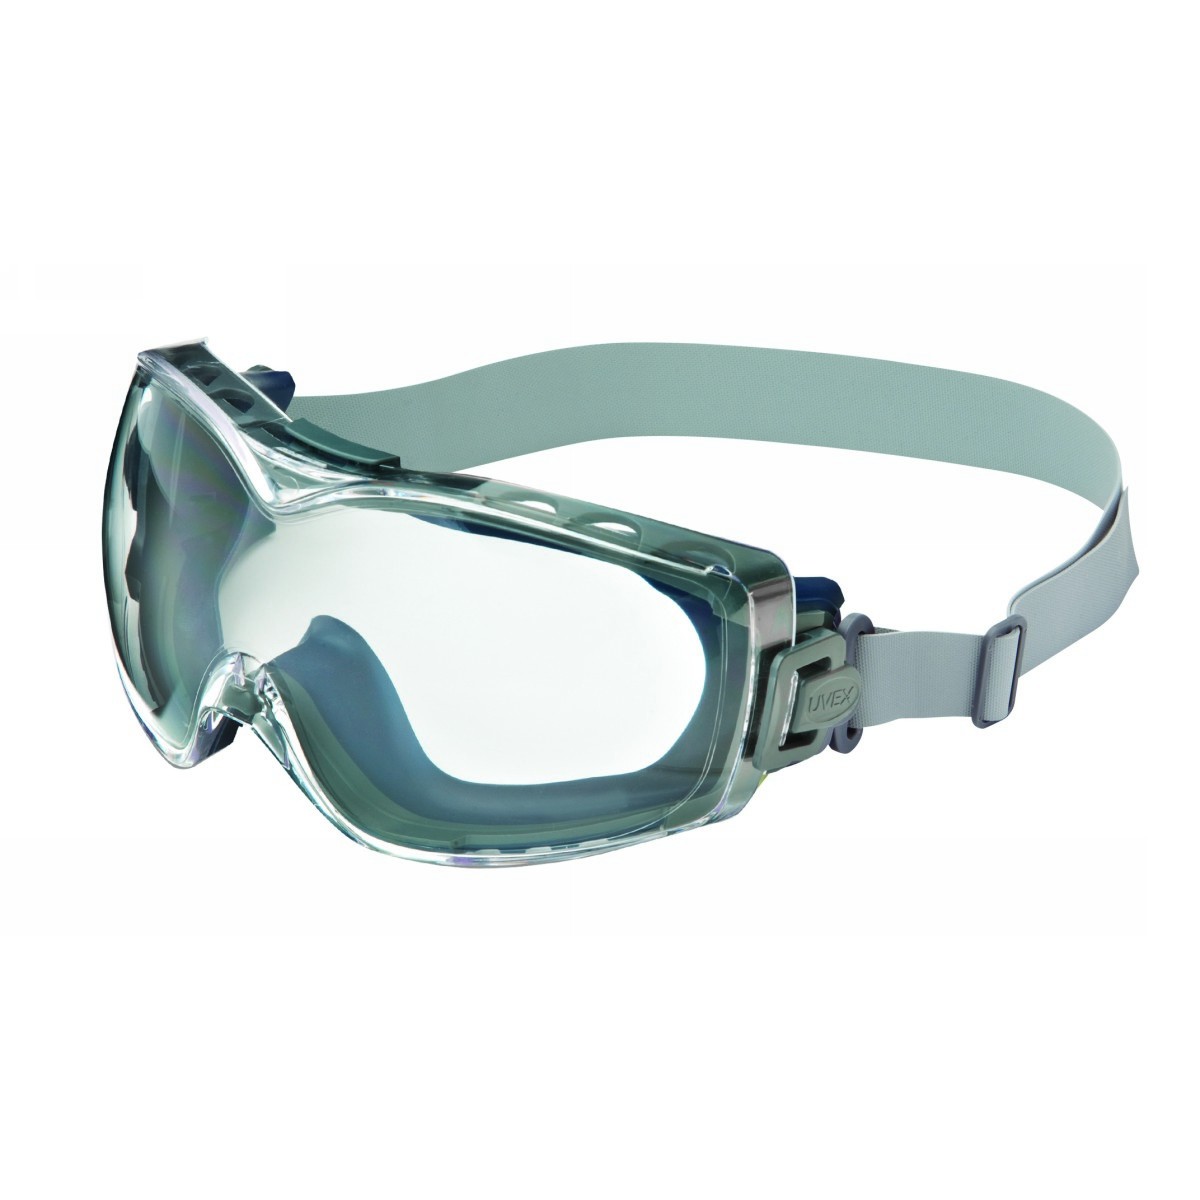 Honeywell Uvex Stealth® OTG Indirect Vent Chemical Splash Impact Over The Glasses Goggles With Blue Soft Frame And Clear HydroSh